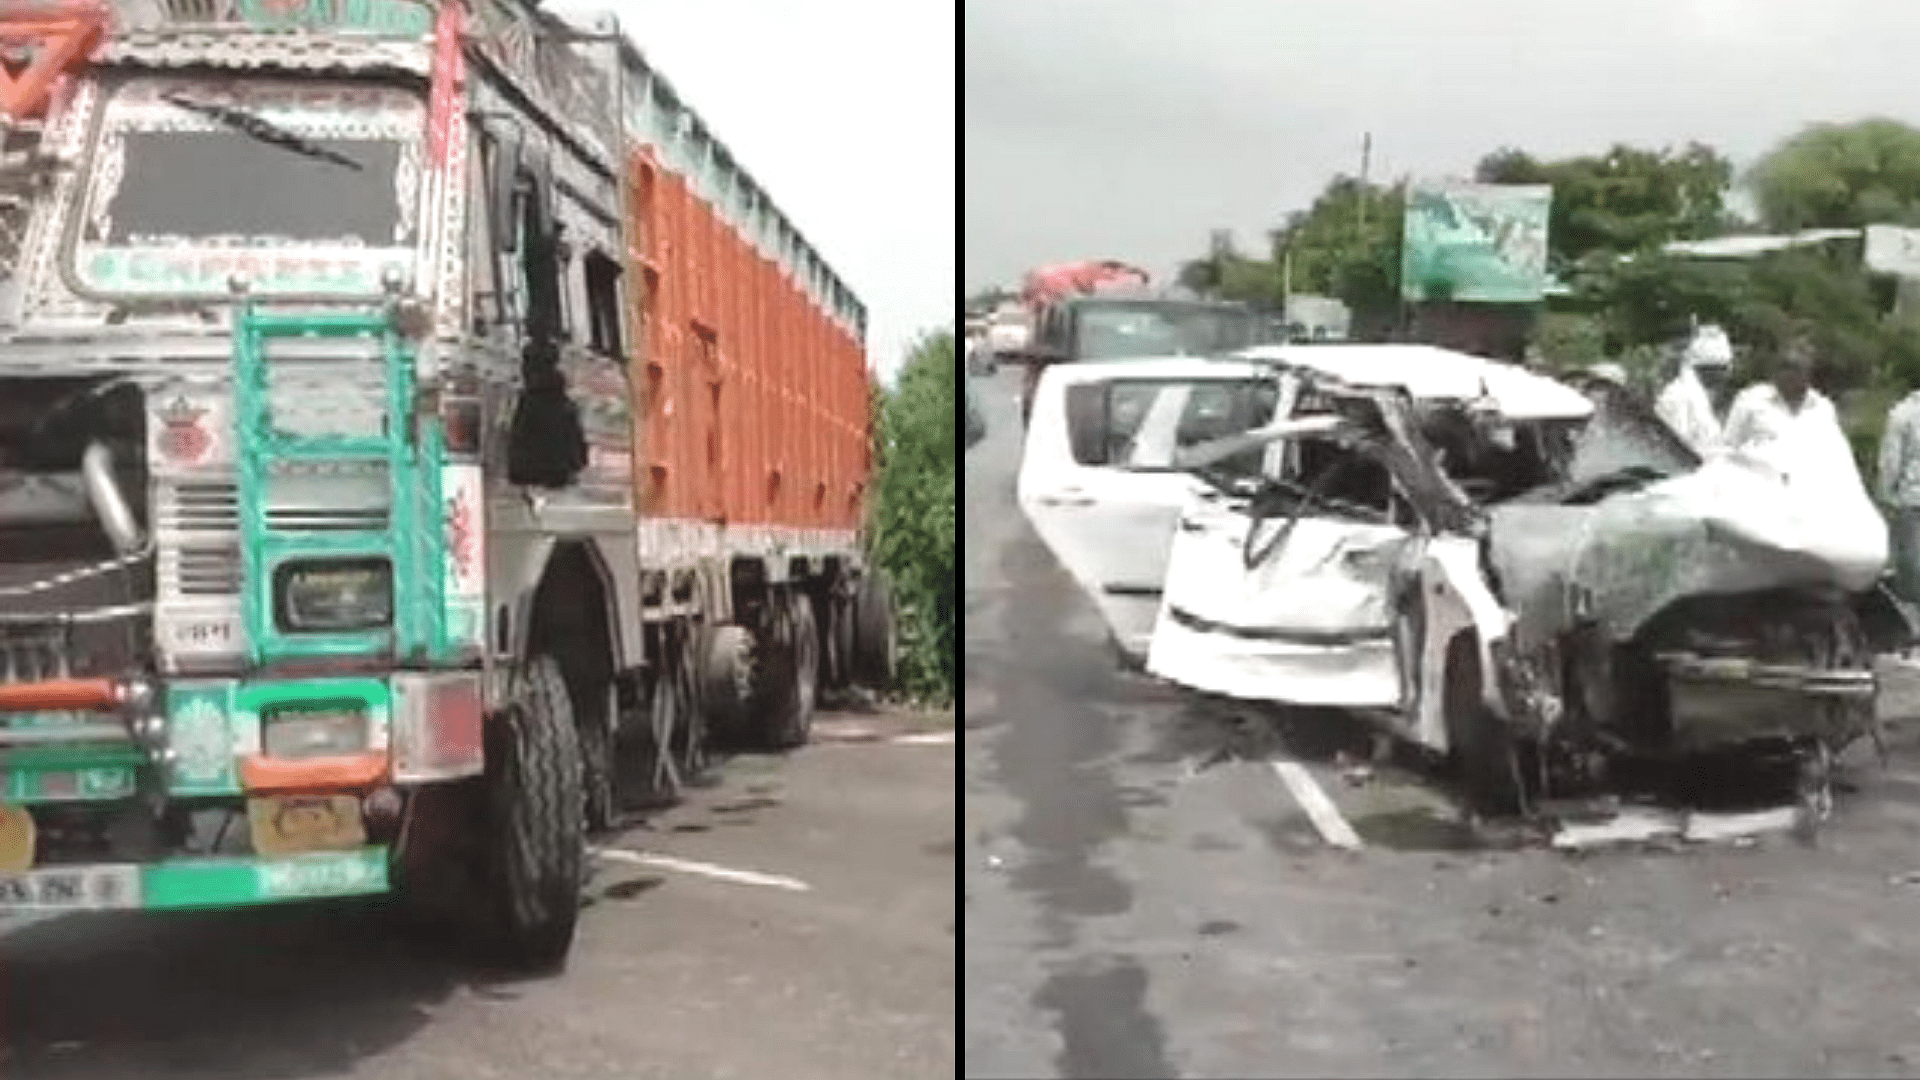 The Unnao rape survivor and her lawyer were critically injured when a truck crashed into their car on NH-31 on Sunday, 28 July 2019. 